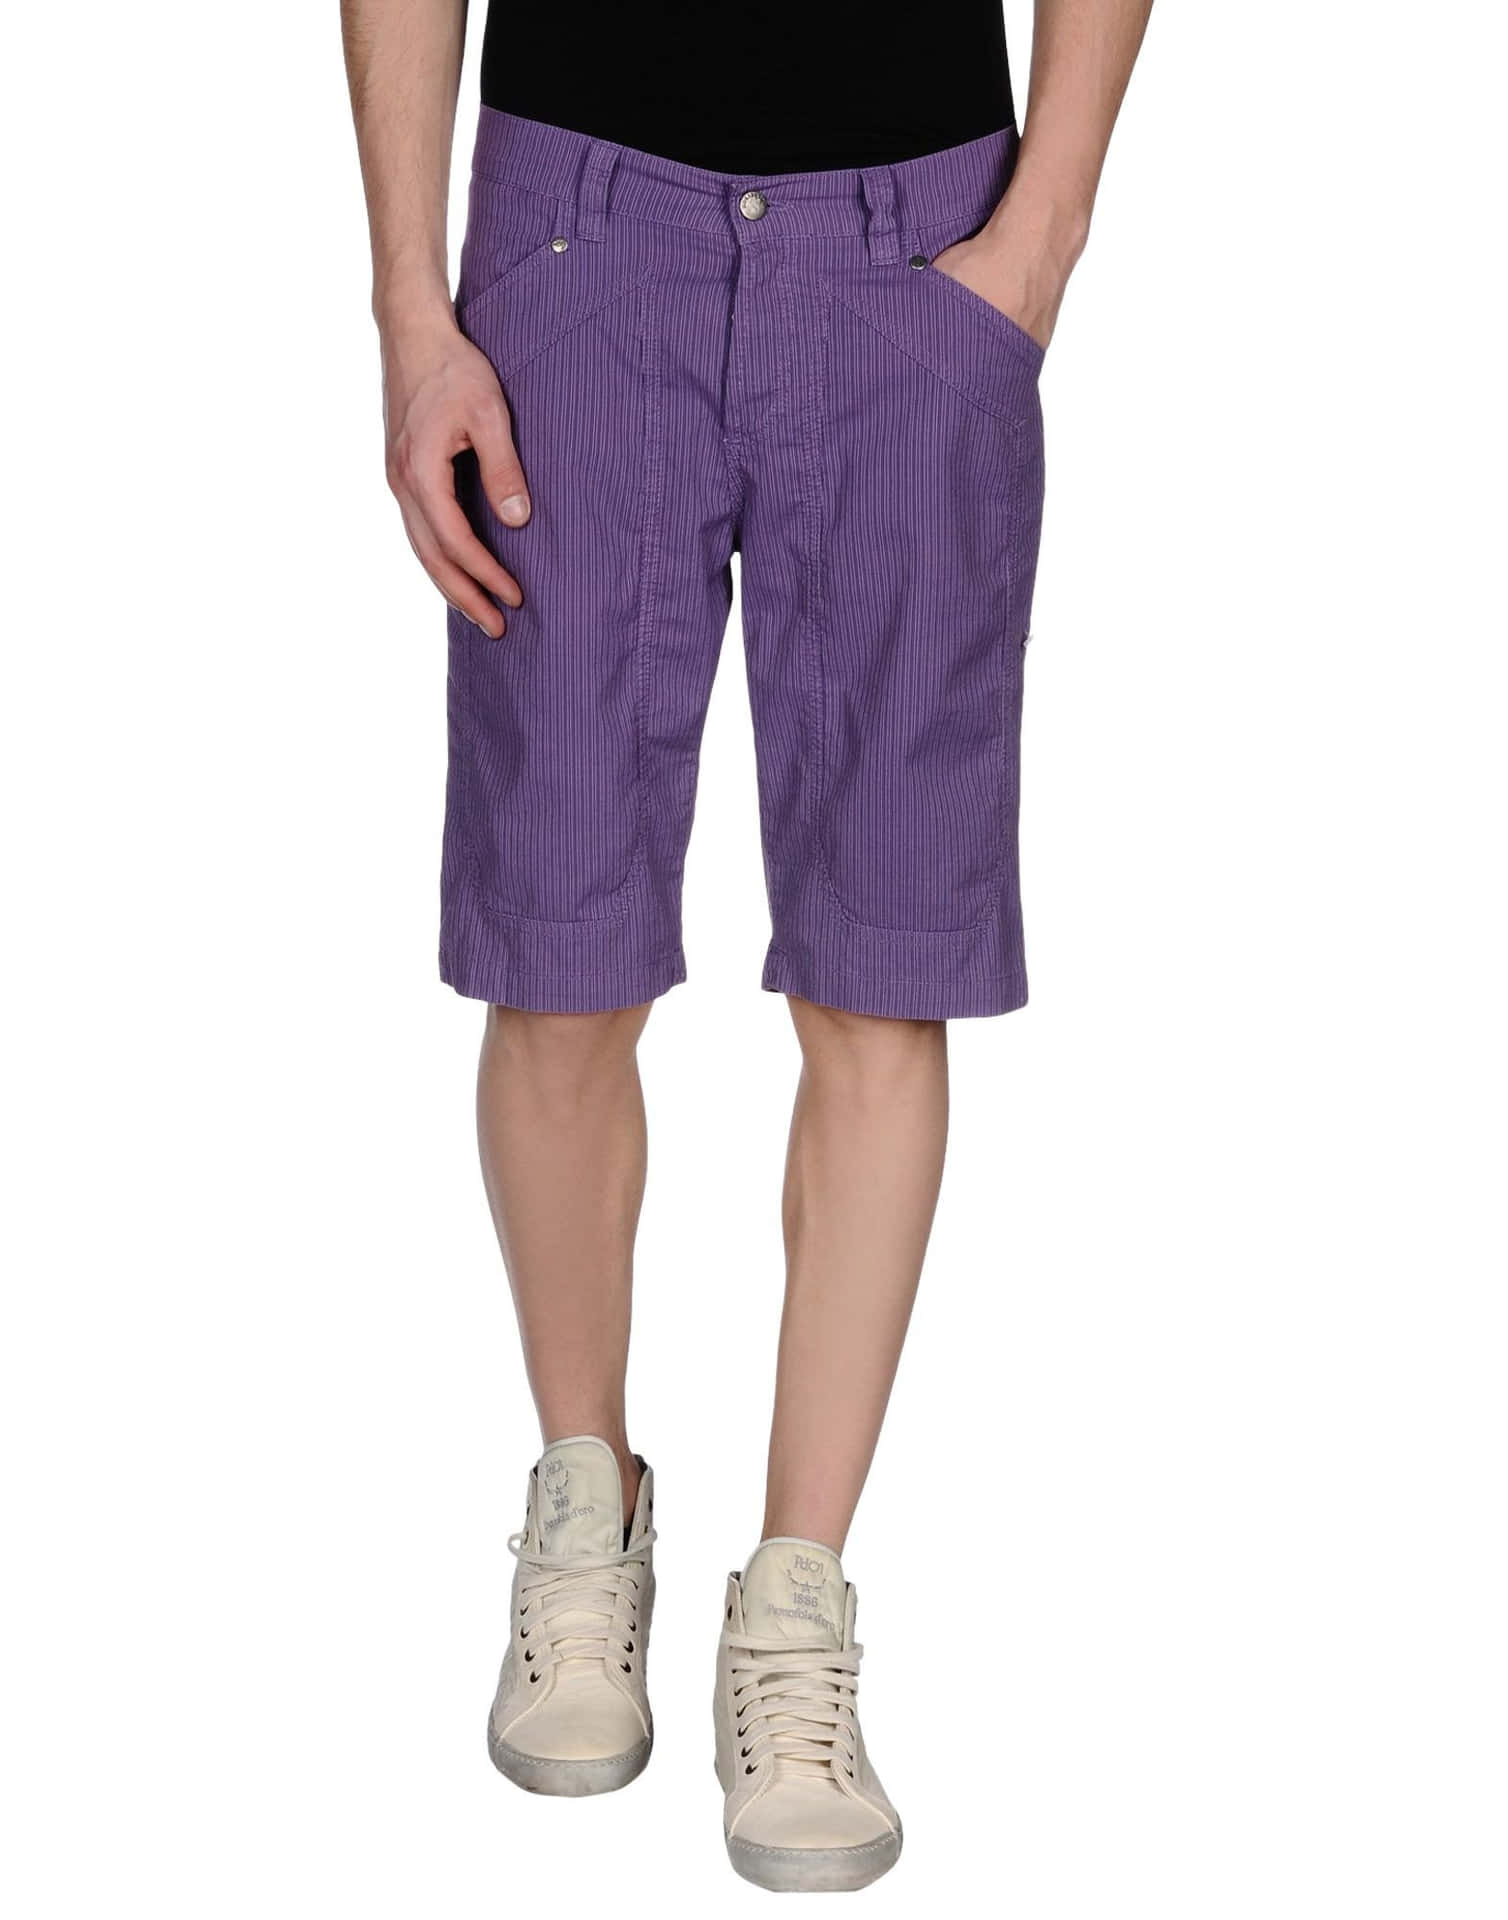 Let your style shine with these Purple Shorts Wallpaper